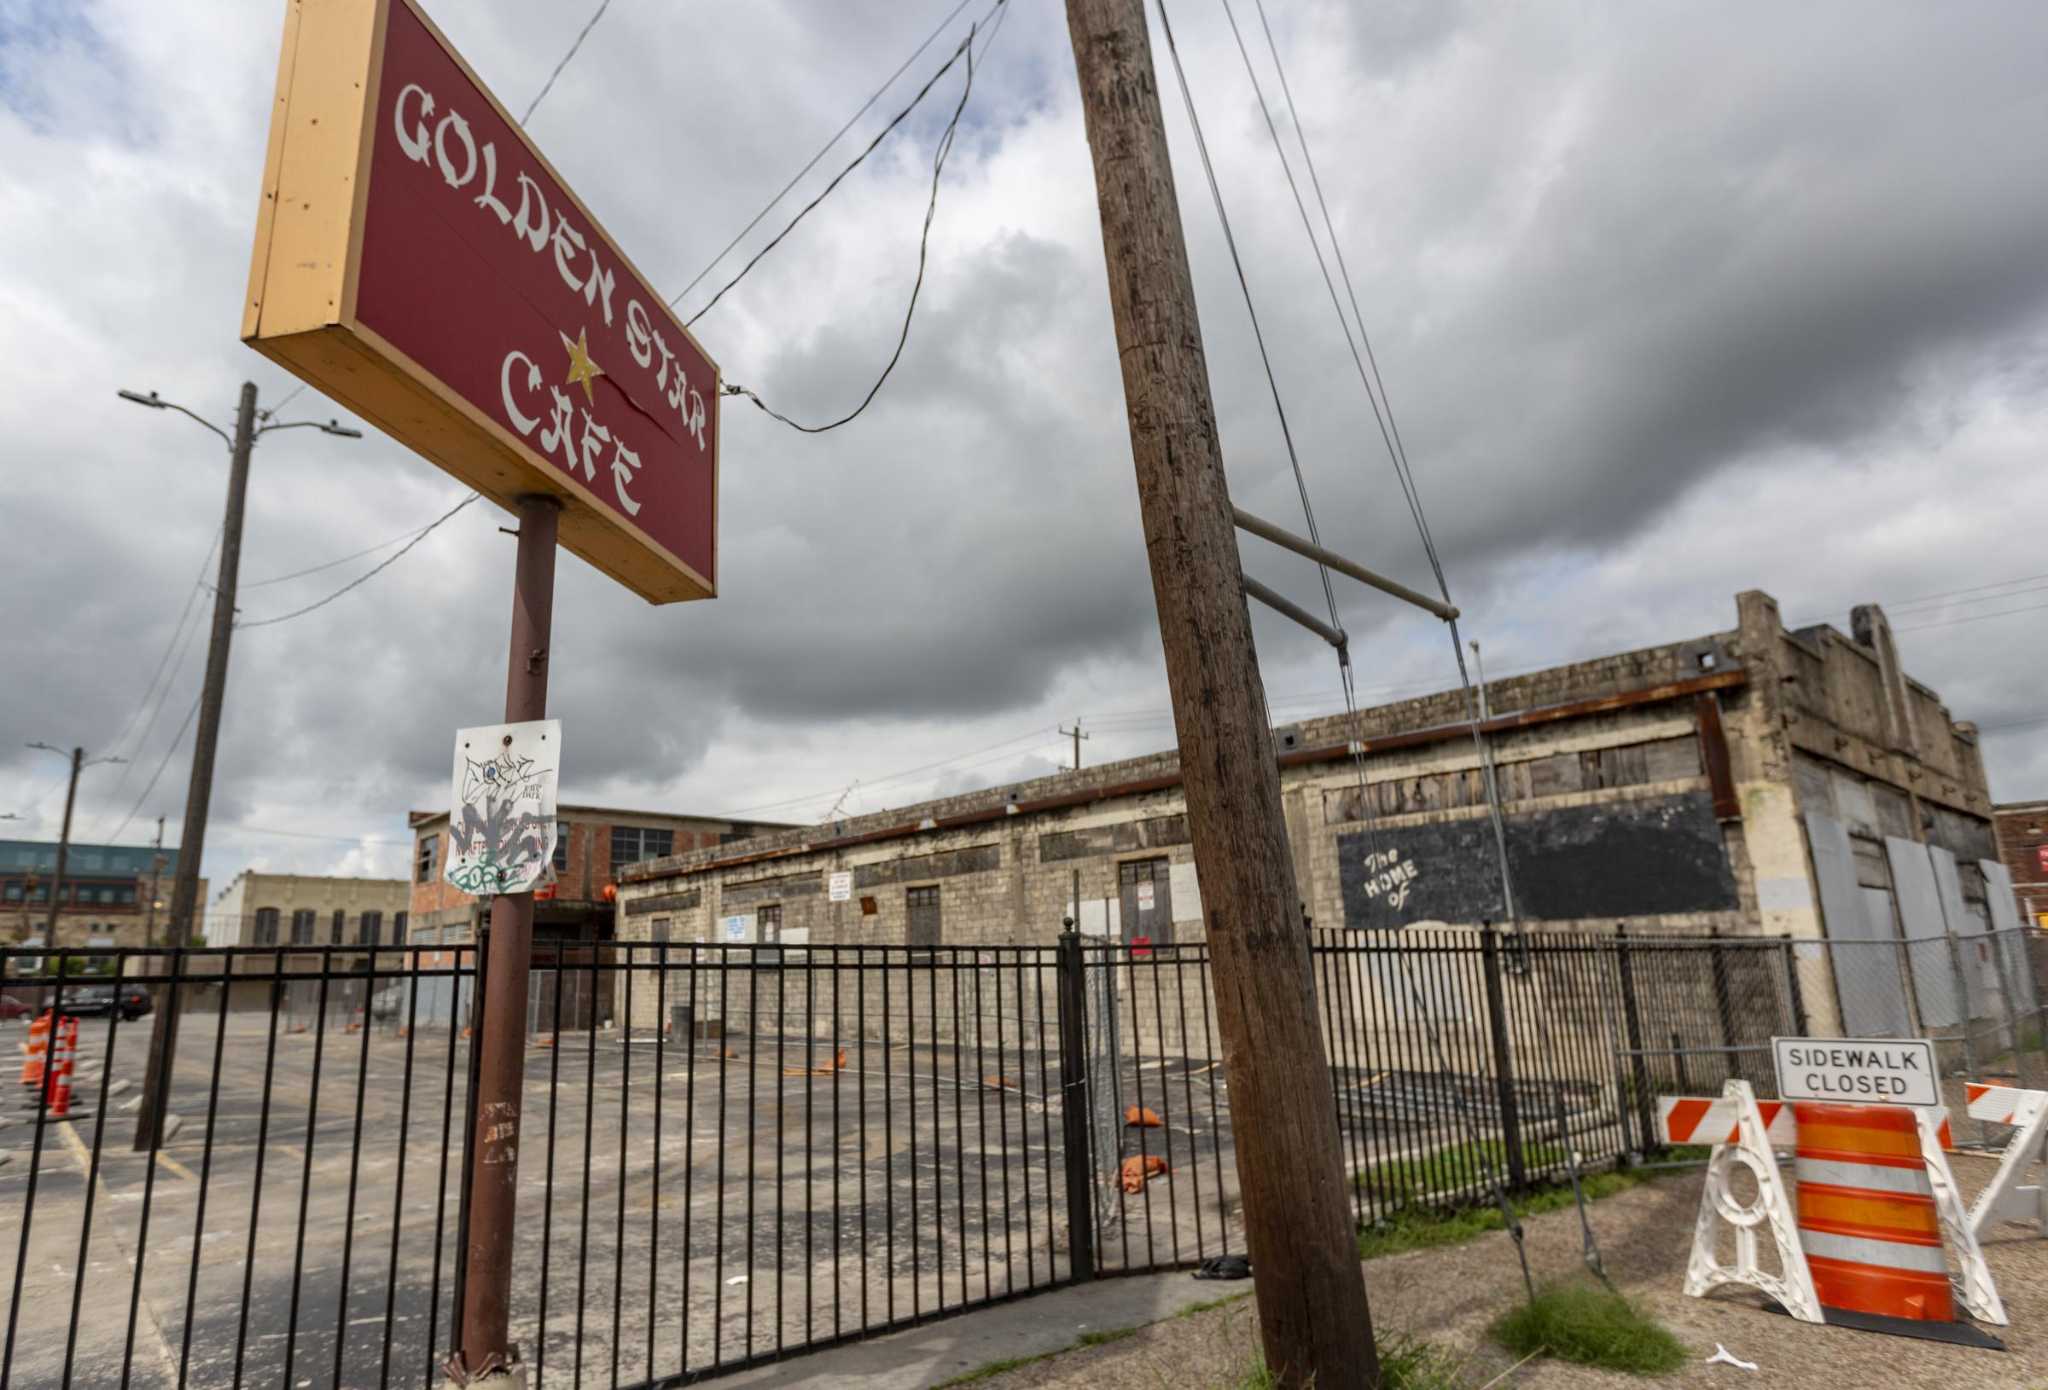 Family behind Golden Star Cafe sues San Antonio over historic Whitt building